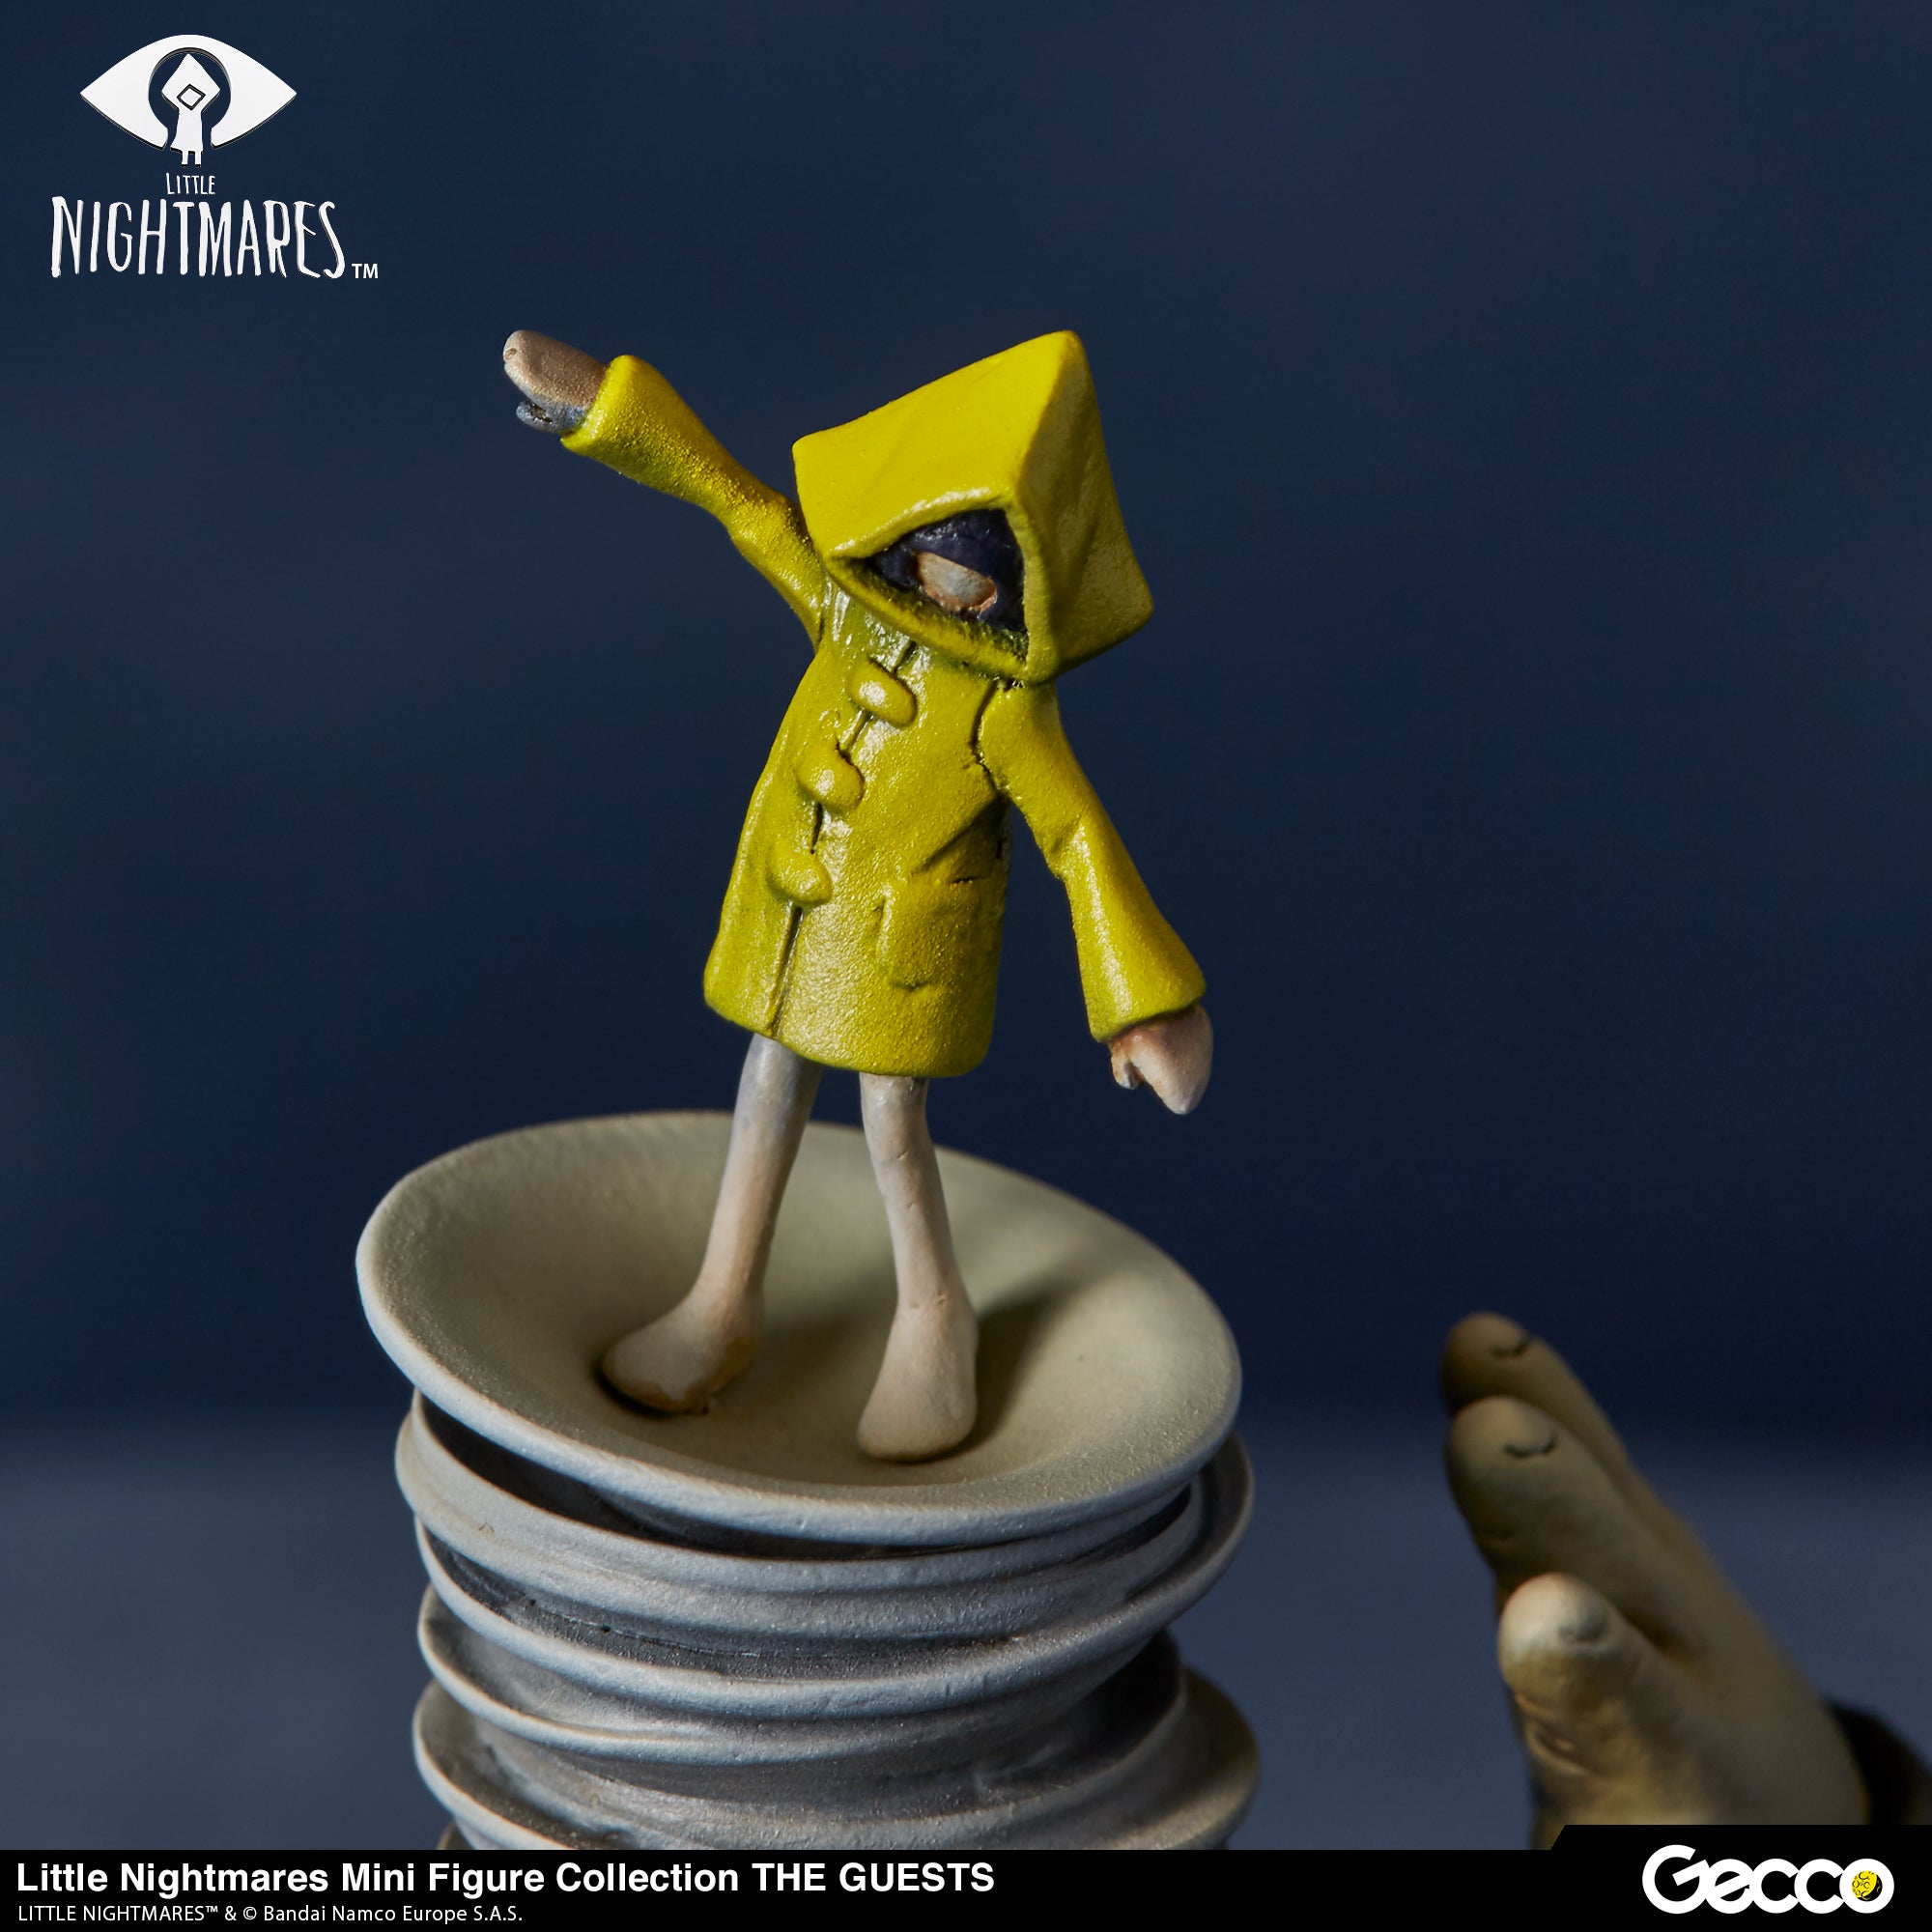 Little Nightmares: The Guests: Mini Figure Collection: Gecco